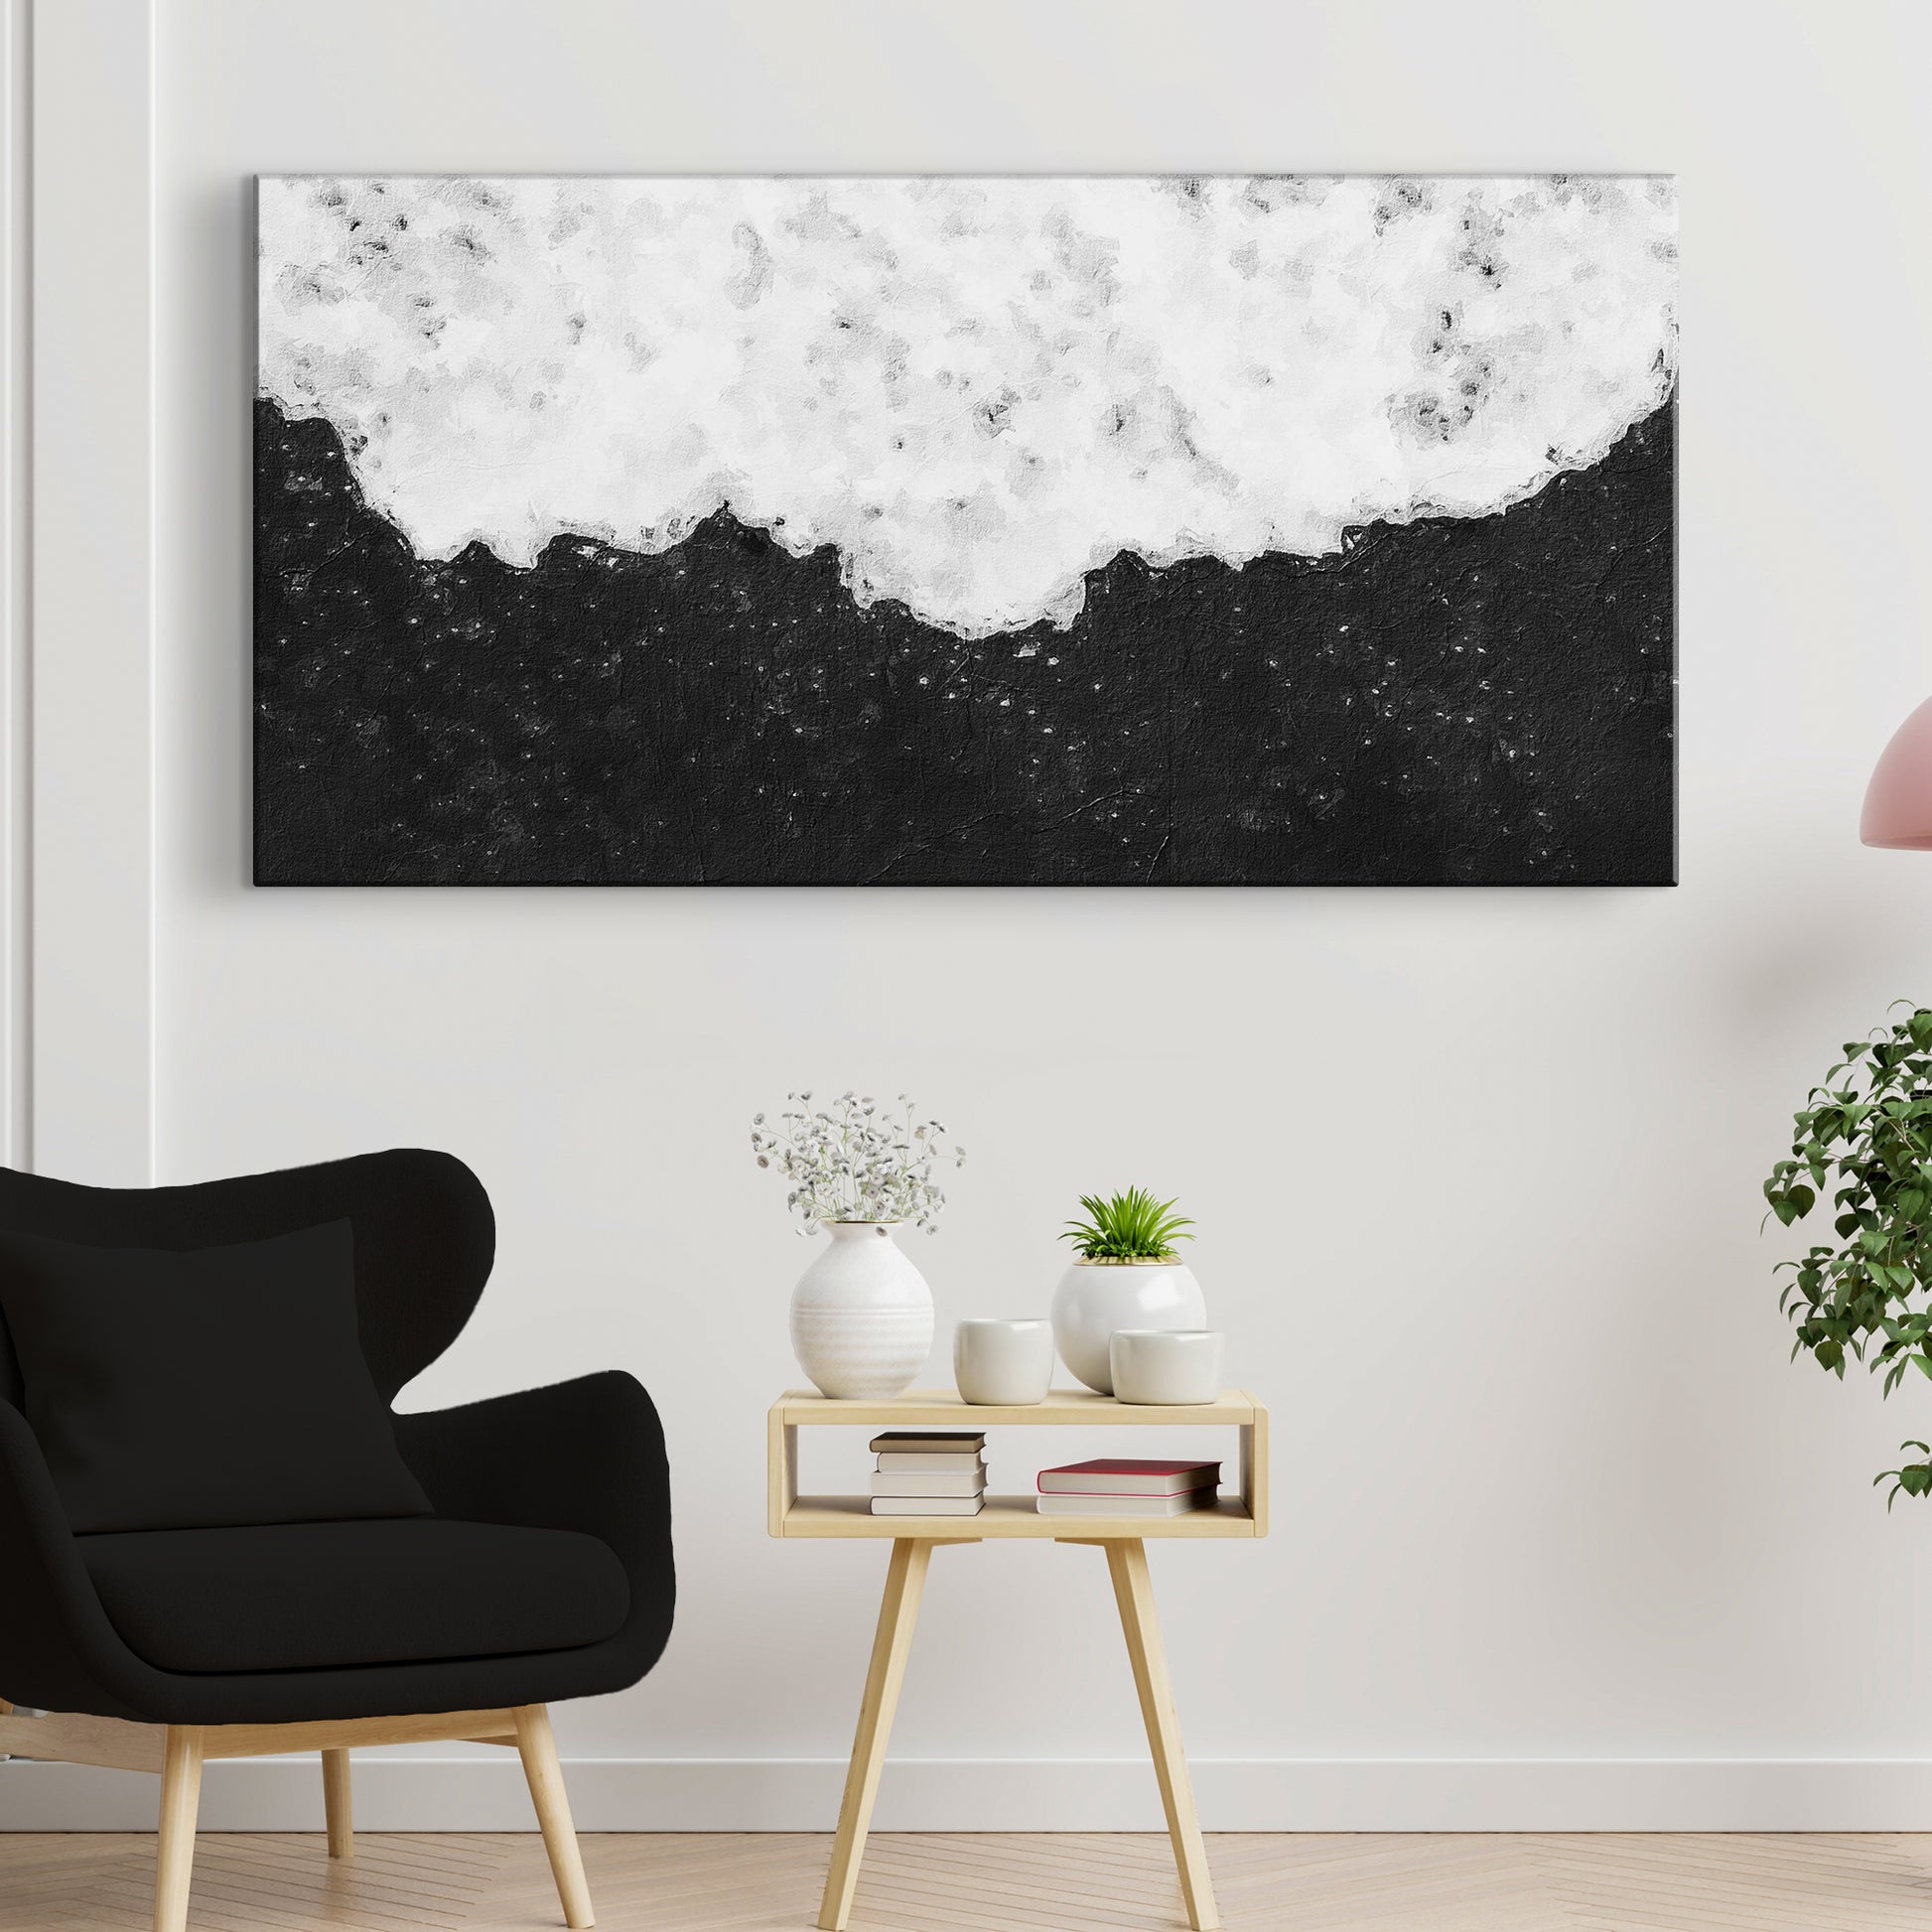 Black And White Textured Painting Canvas Wall Art - Image by Tailored Canvases